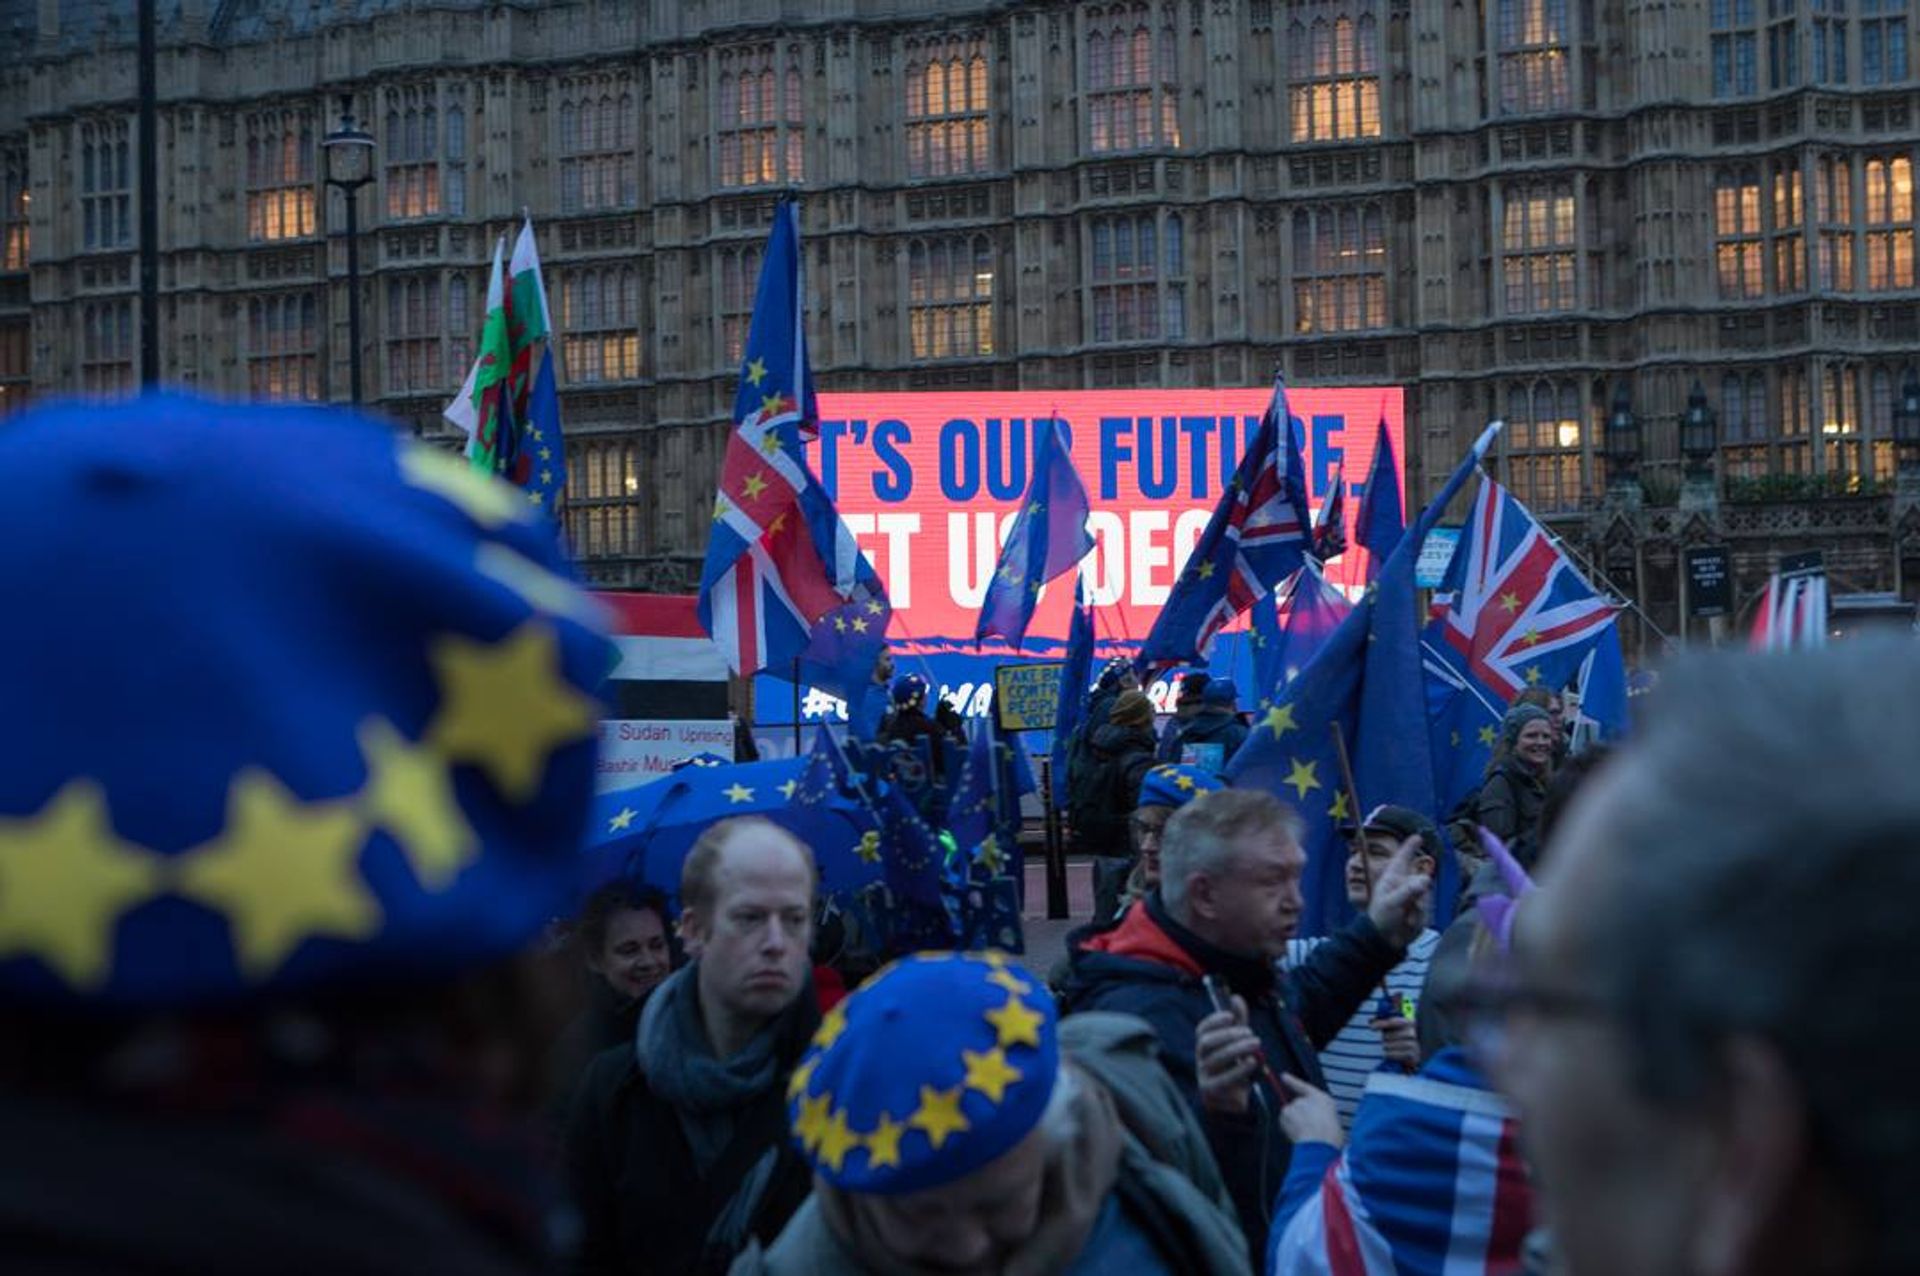 Protestors gathered both in support and against Brexit outside the House of Parliament in London last night (15 January) Photo: © www.david-owens.co.uk